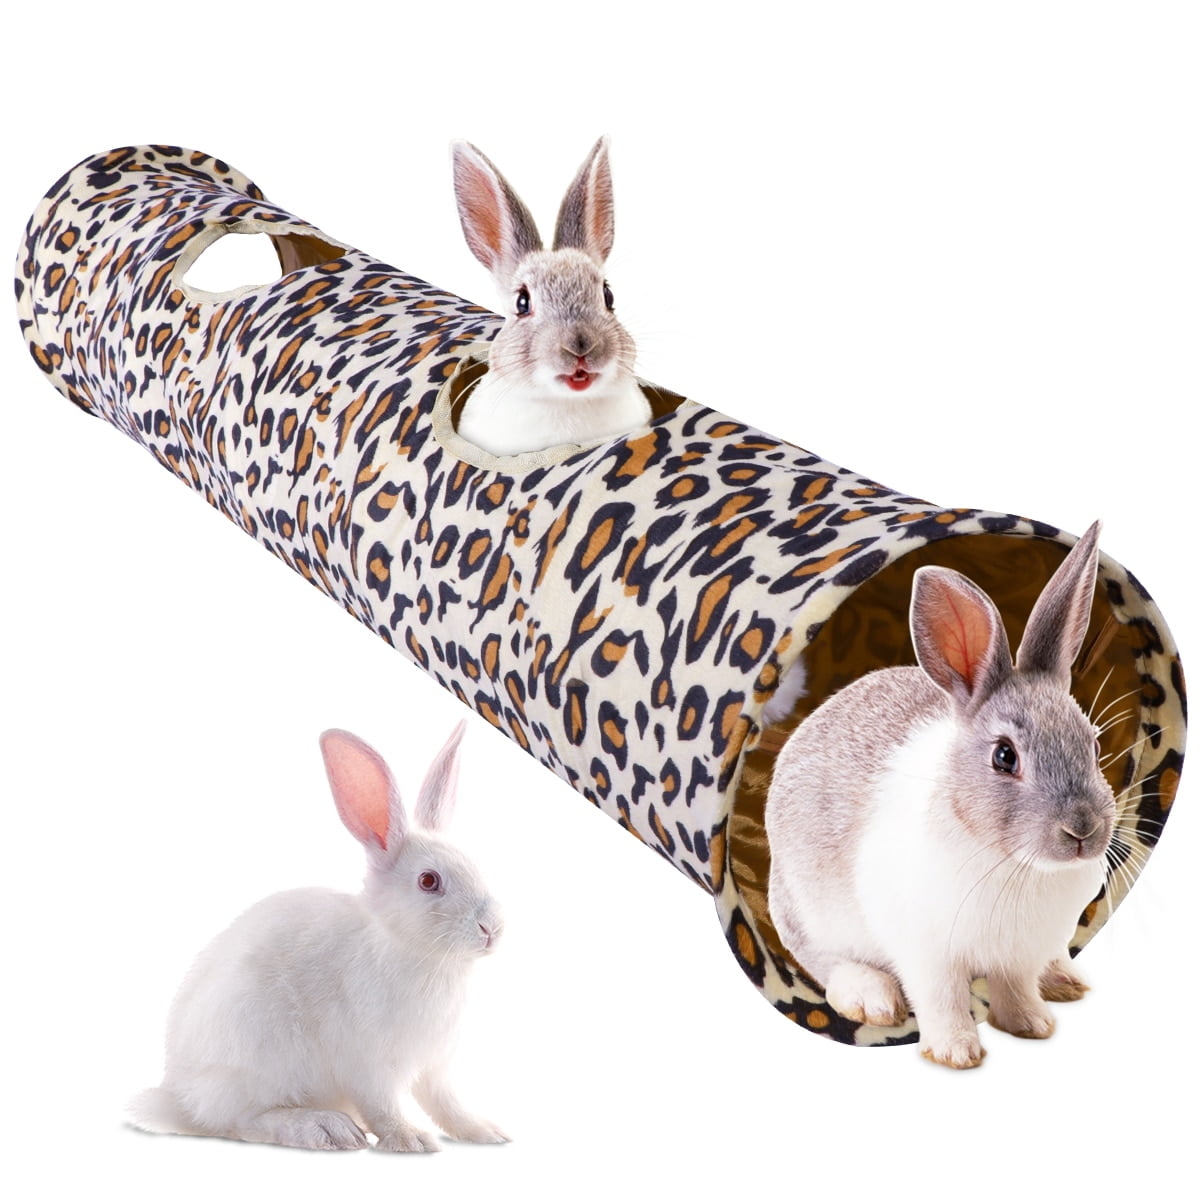 Pet Tunnel Leopard Print Pet Rabbit Play Tunnel Collapsible Tunnel Space-Saving Nontoxic Toys for Dogs Cat Rabbits 120×250 cm